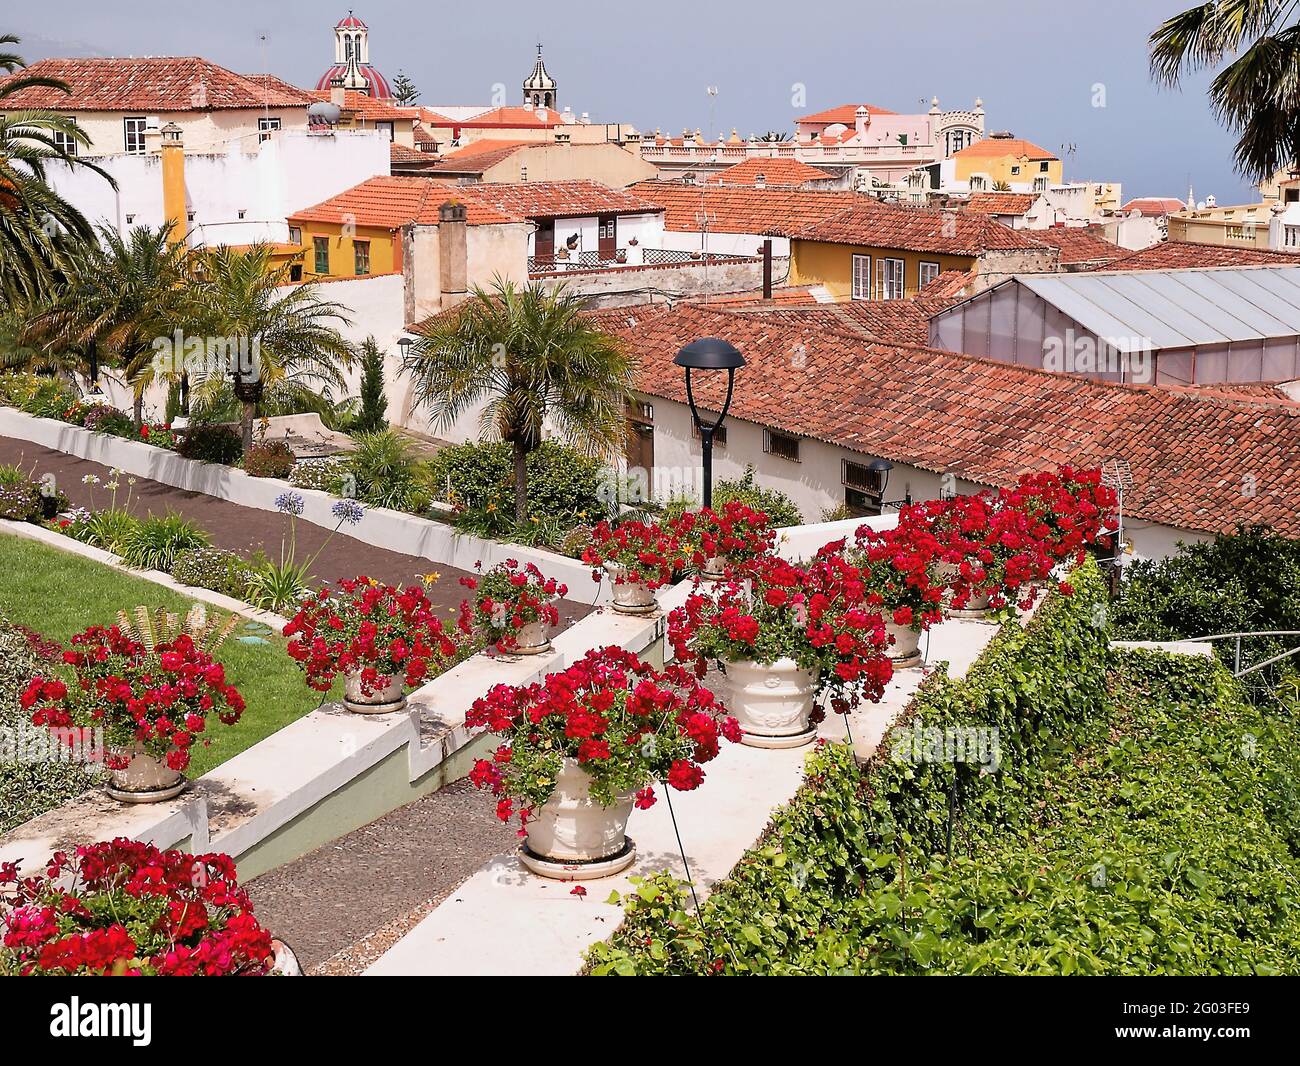 Magnificent view over the red tile roofs of La Orotava on the island of Tenerife View over the old houses and red tile roofs of the old town of 'La Or Stock Photo